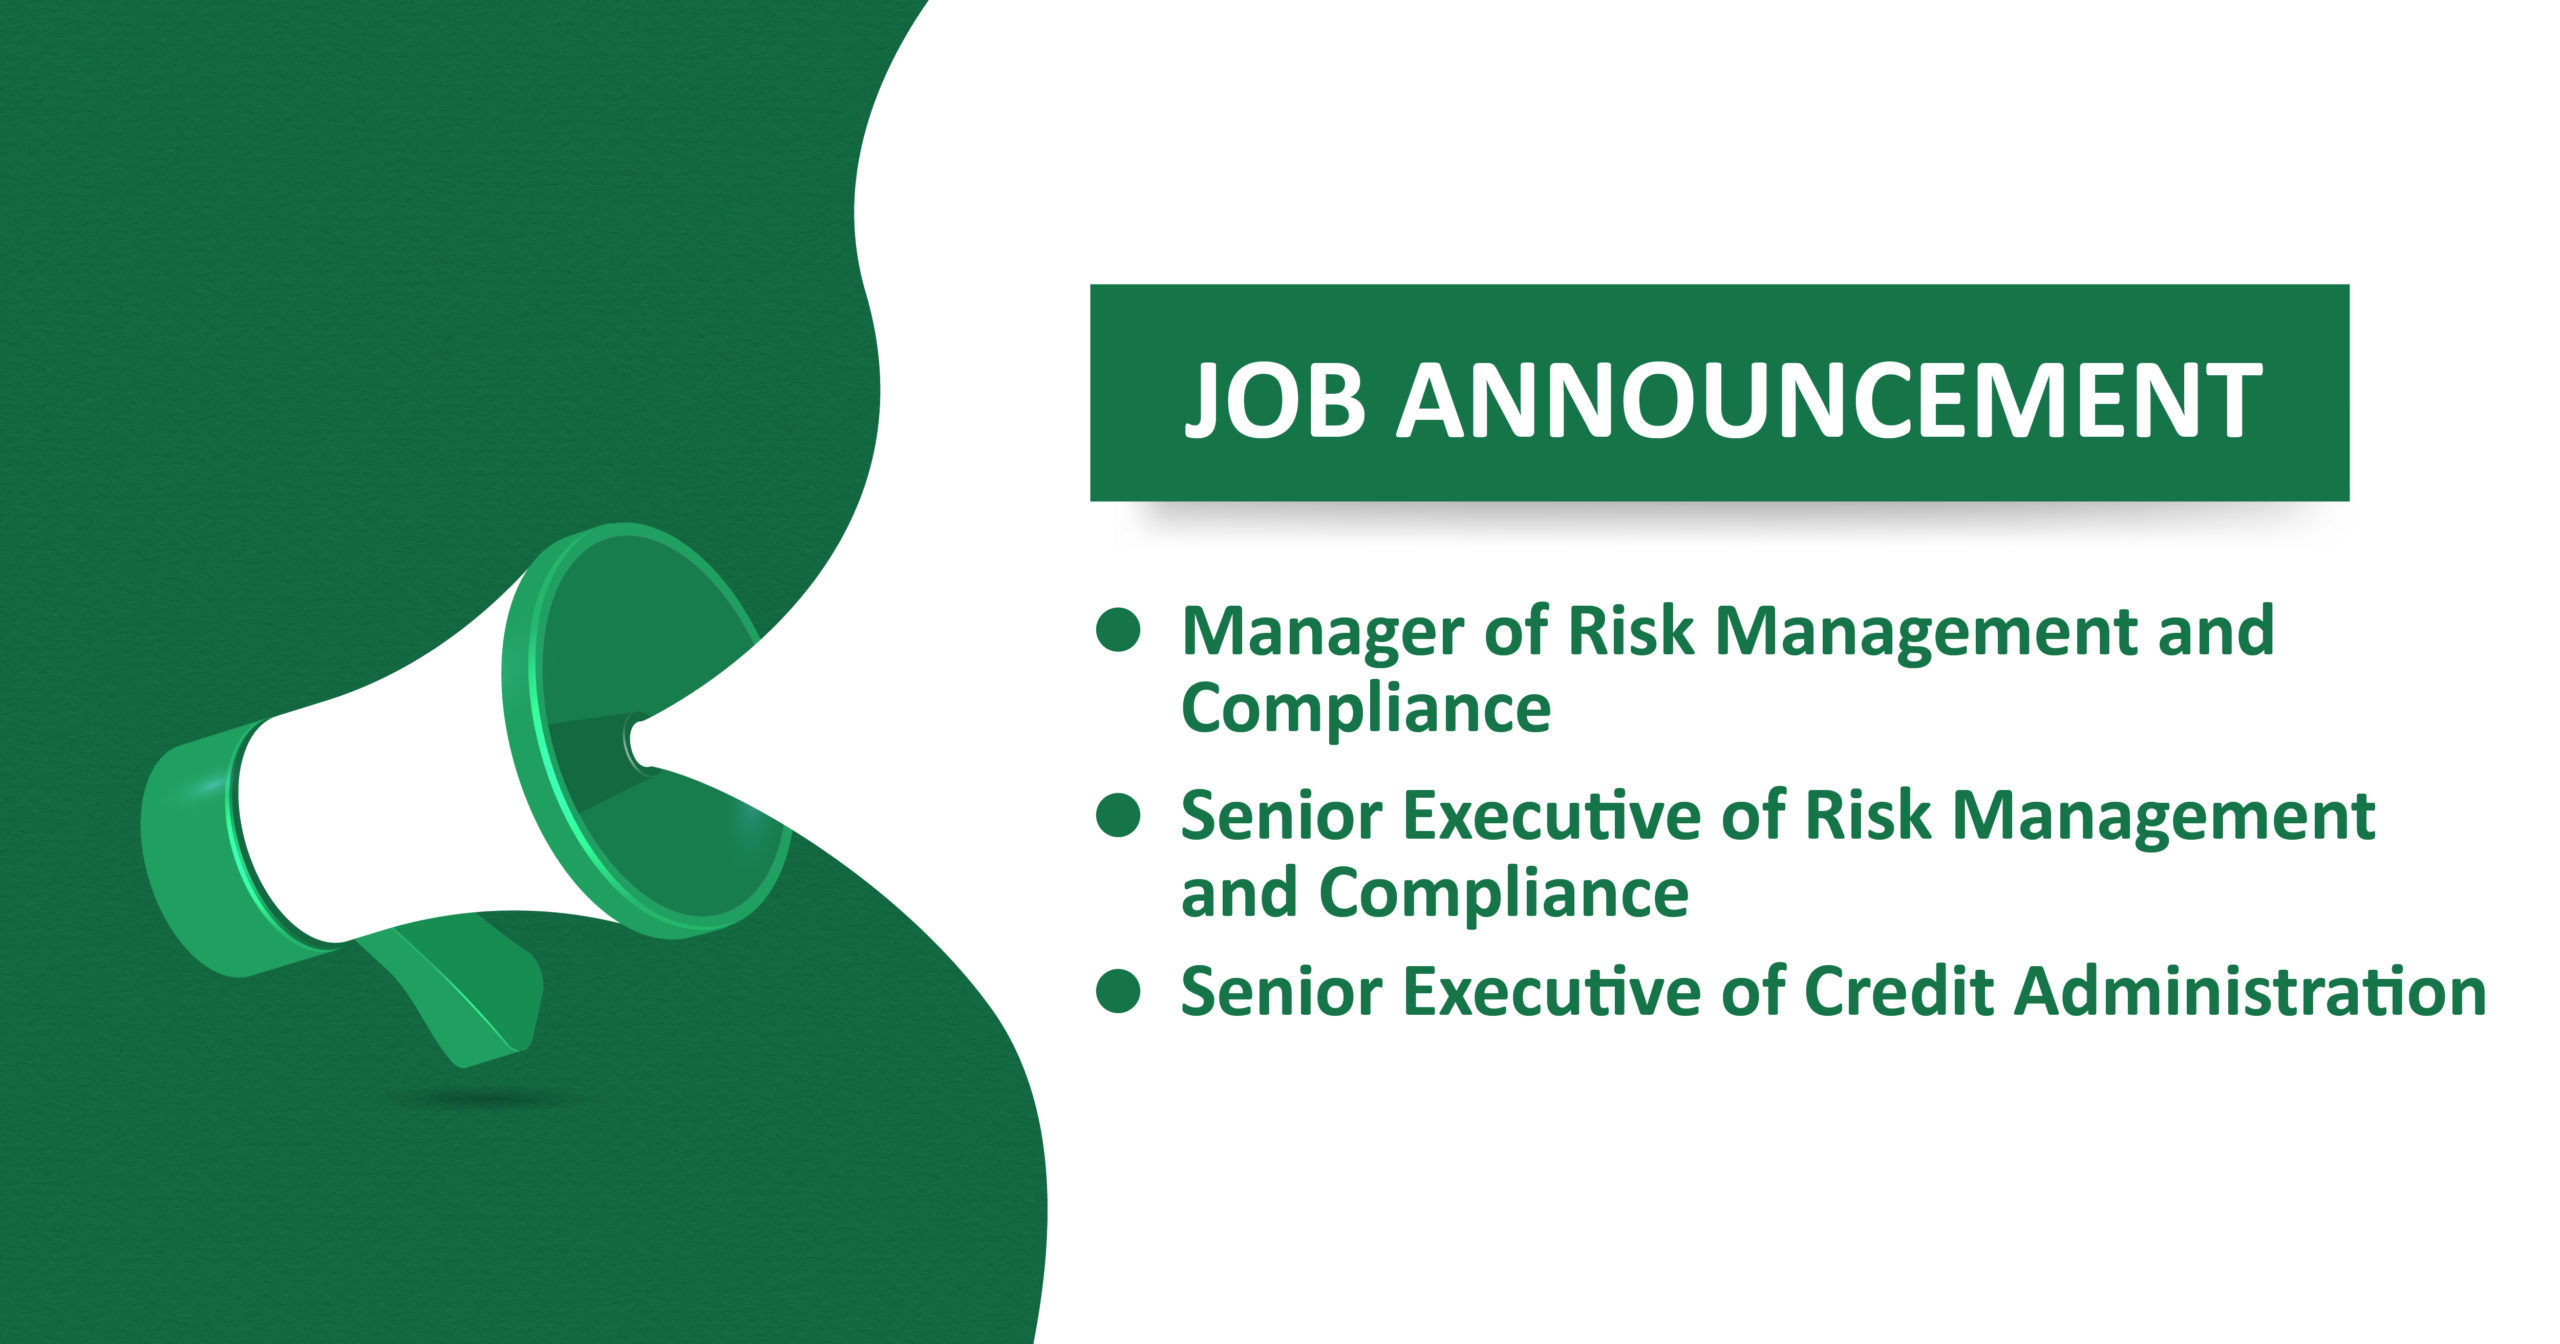 Various Job Vacancies with CGCC-Manager of Risk Management and Compliance, Senior Executive of Risk Management and Compliance, and Senior Executive of Credit Administration